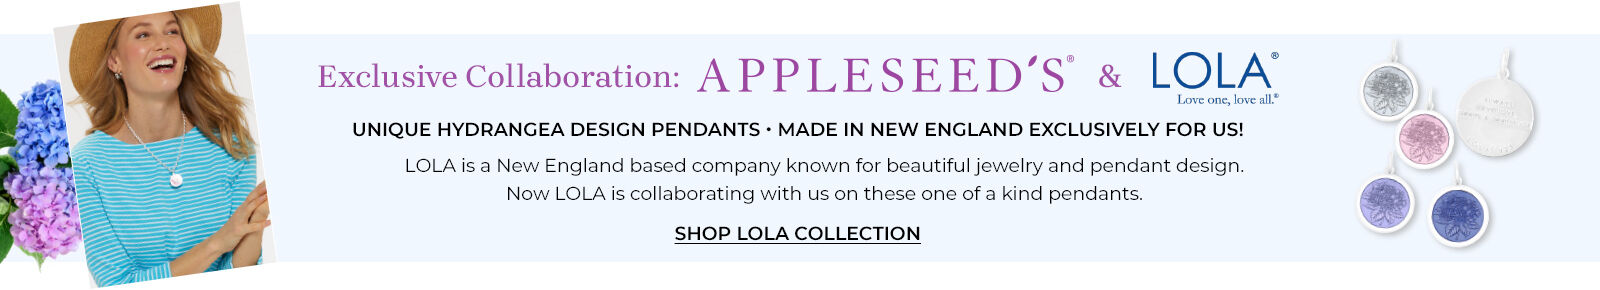 exclusive collaboration: appleseed's & lol love one, love all unique hydrangea design pendants. made in new england exclusively for us! lola is a new england based company known for beautiful jewelry and pendant design. now lola is collaborating with us on these one of a kind pendants. shop lola collection